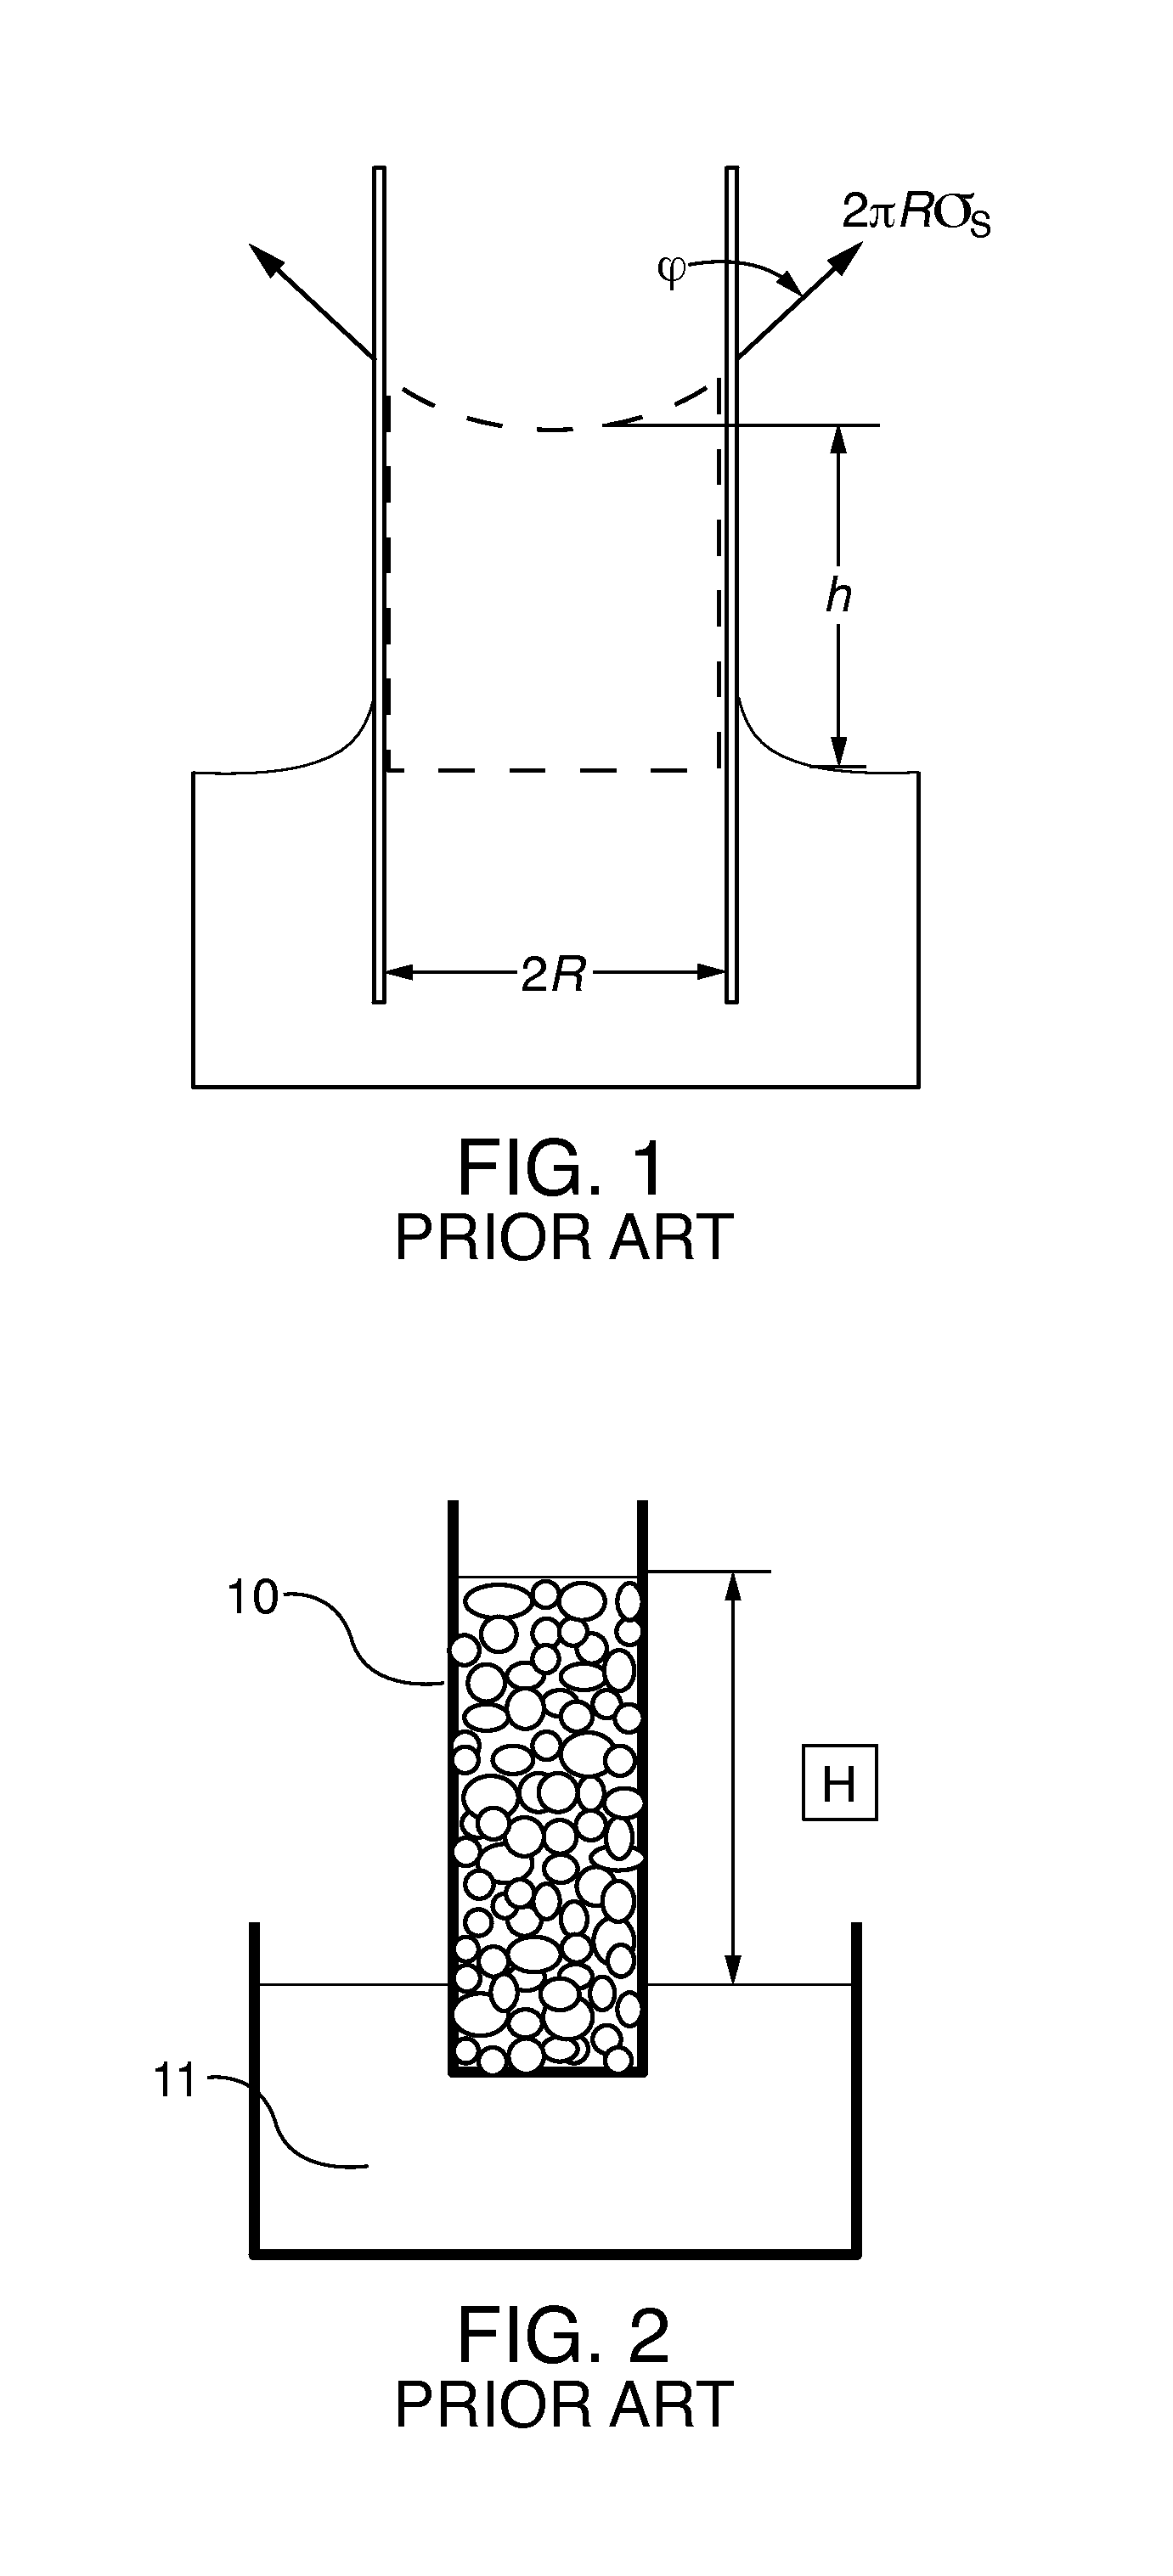 Method for holding brazing material during a brazing operation